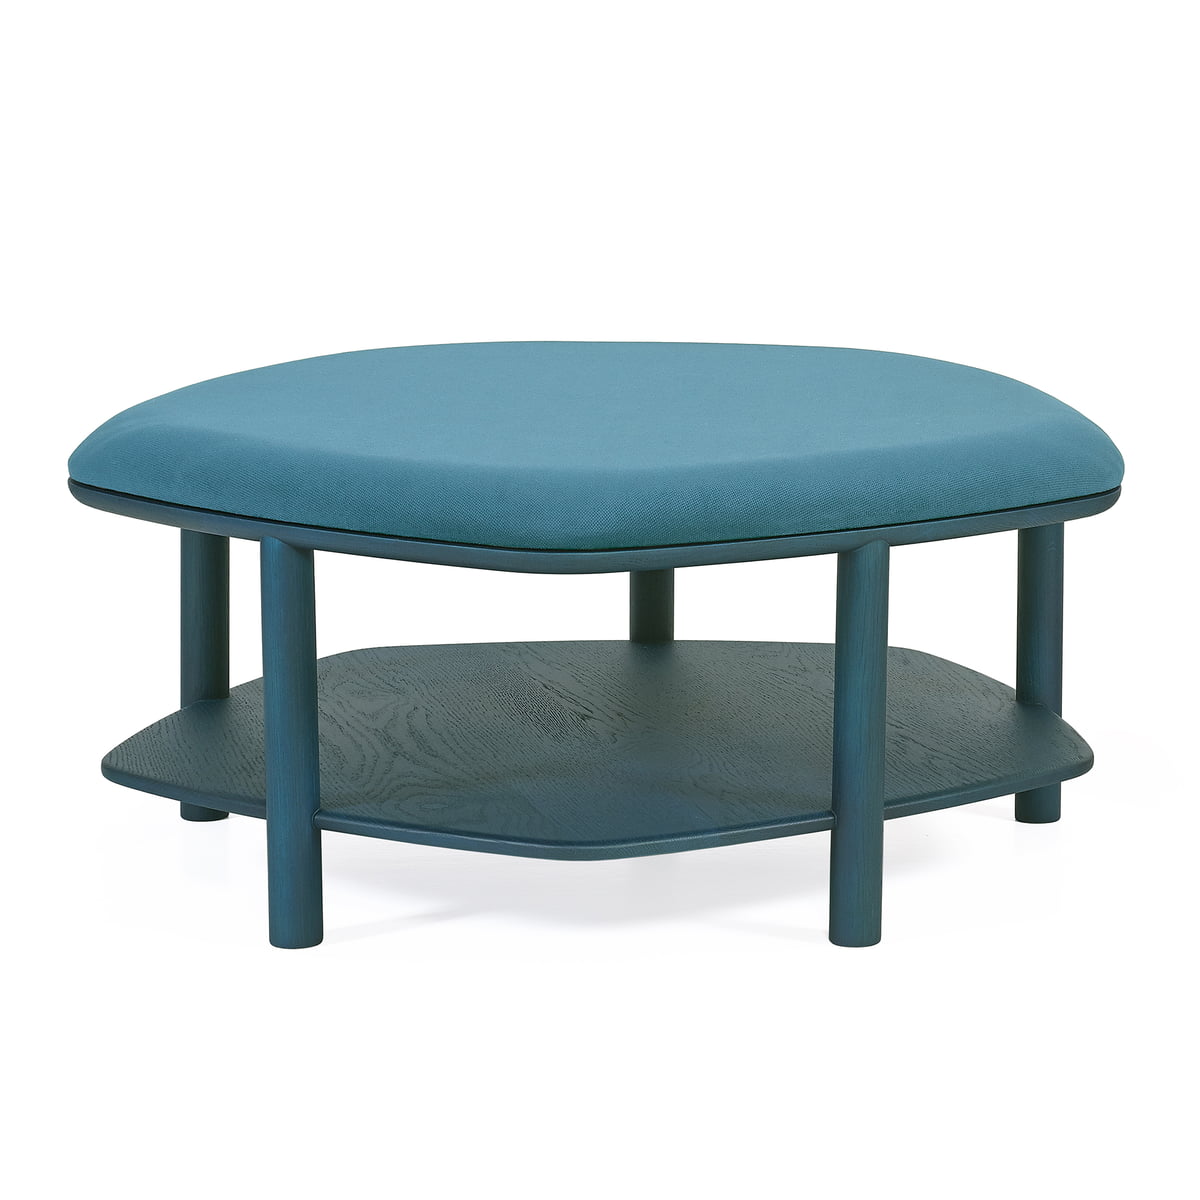 Featured image of post Light Blue Ottoman Coffee Table - Blue, gray, red, coffee, green, yellow, pink, brown, black, purple, orange, beige, khaki, white.